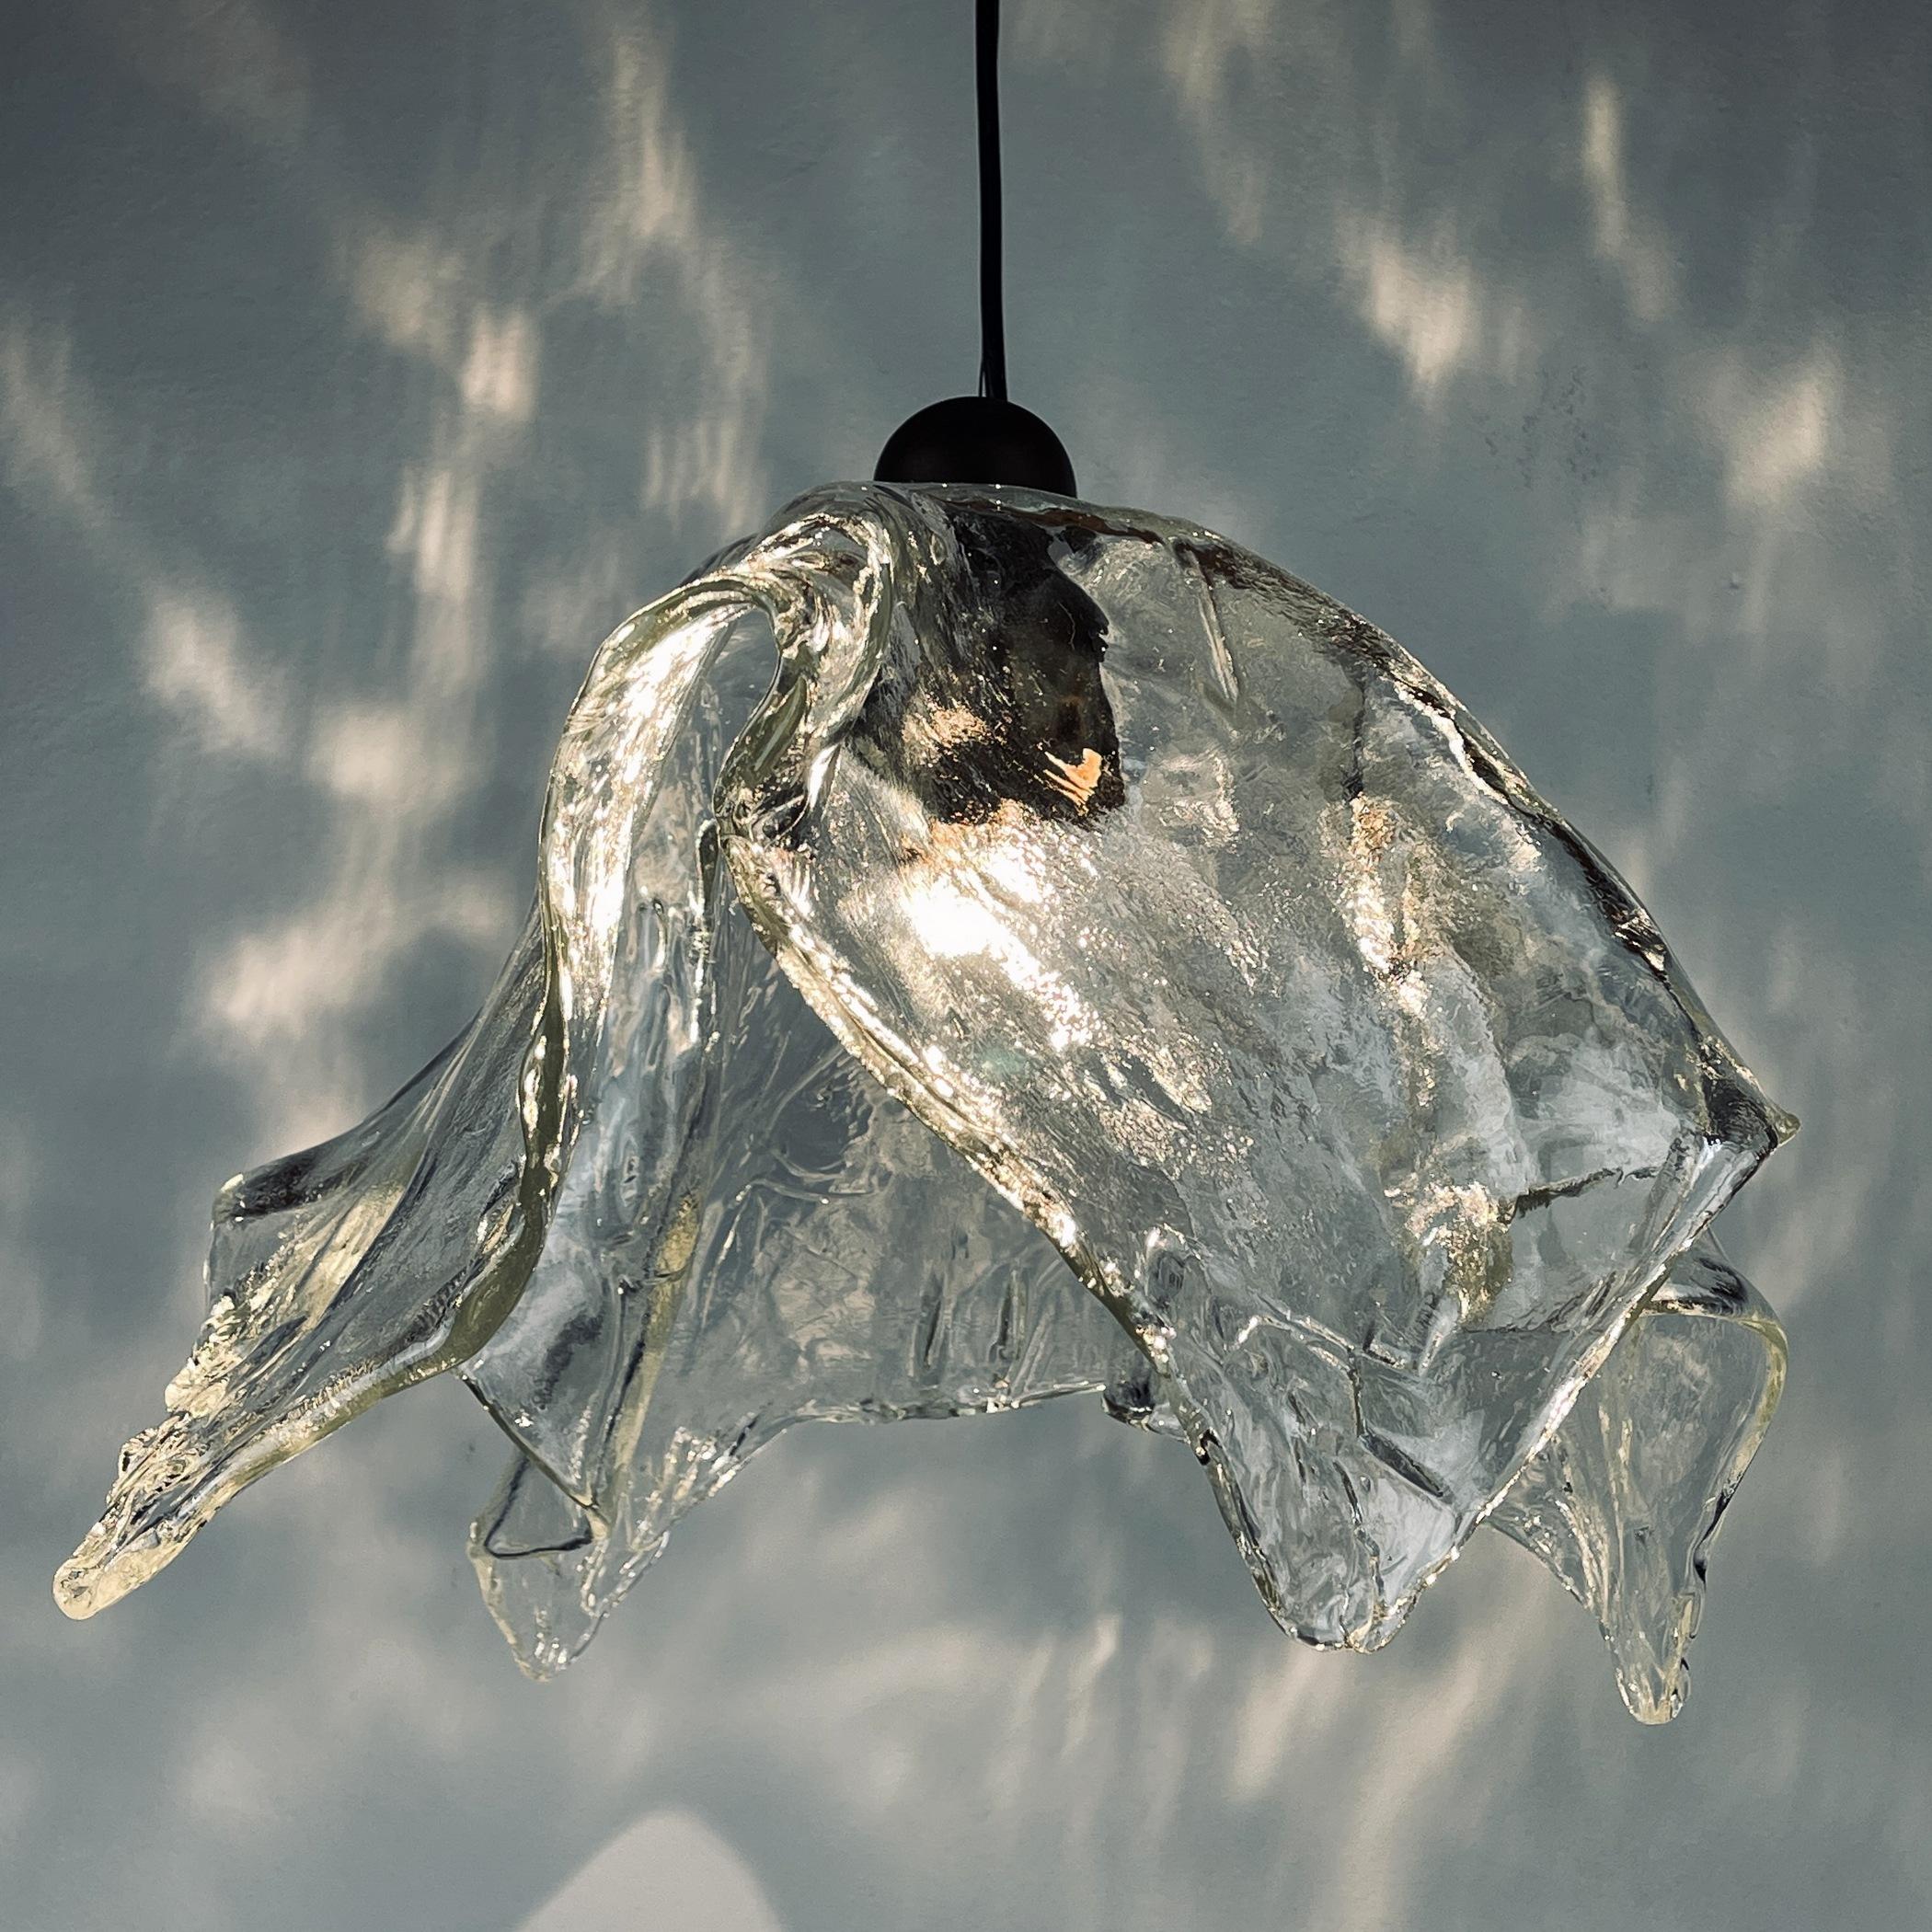 Original impressive pendant lamp, produced by AV Mazzega in Italy, in the 1950s. The shade of this model, also known as 'Fazzoletto', resembles a large handkerchief. The shade is molded by hand. The lamp also displays some true Murano craftsmanship.